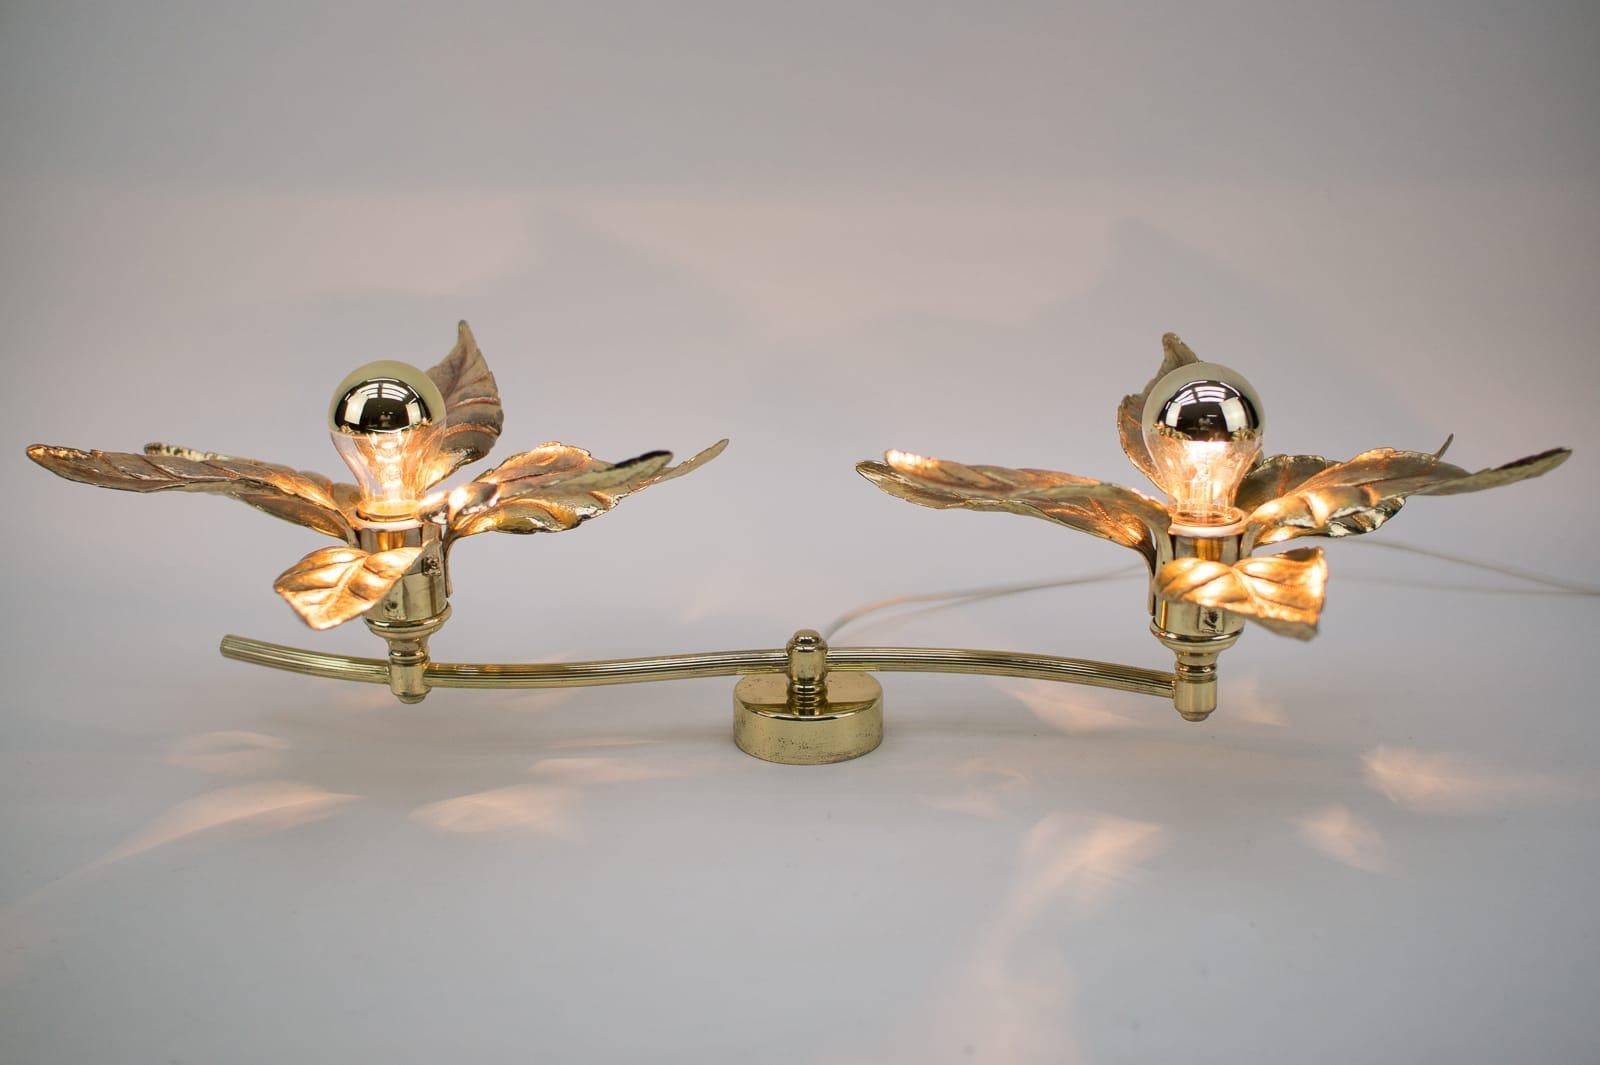 Wall or Ceiling Double Lamp by Willy Daro for Massive, Belgium, 1960s In Good Condition For Sale In Nürnberg, Bayern